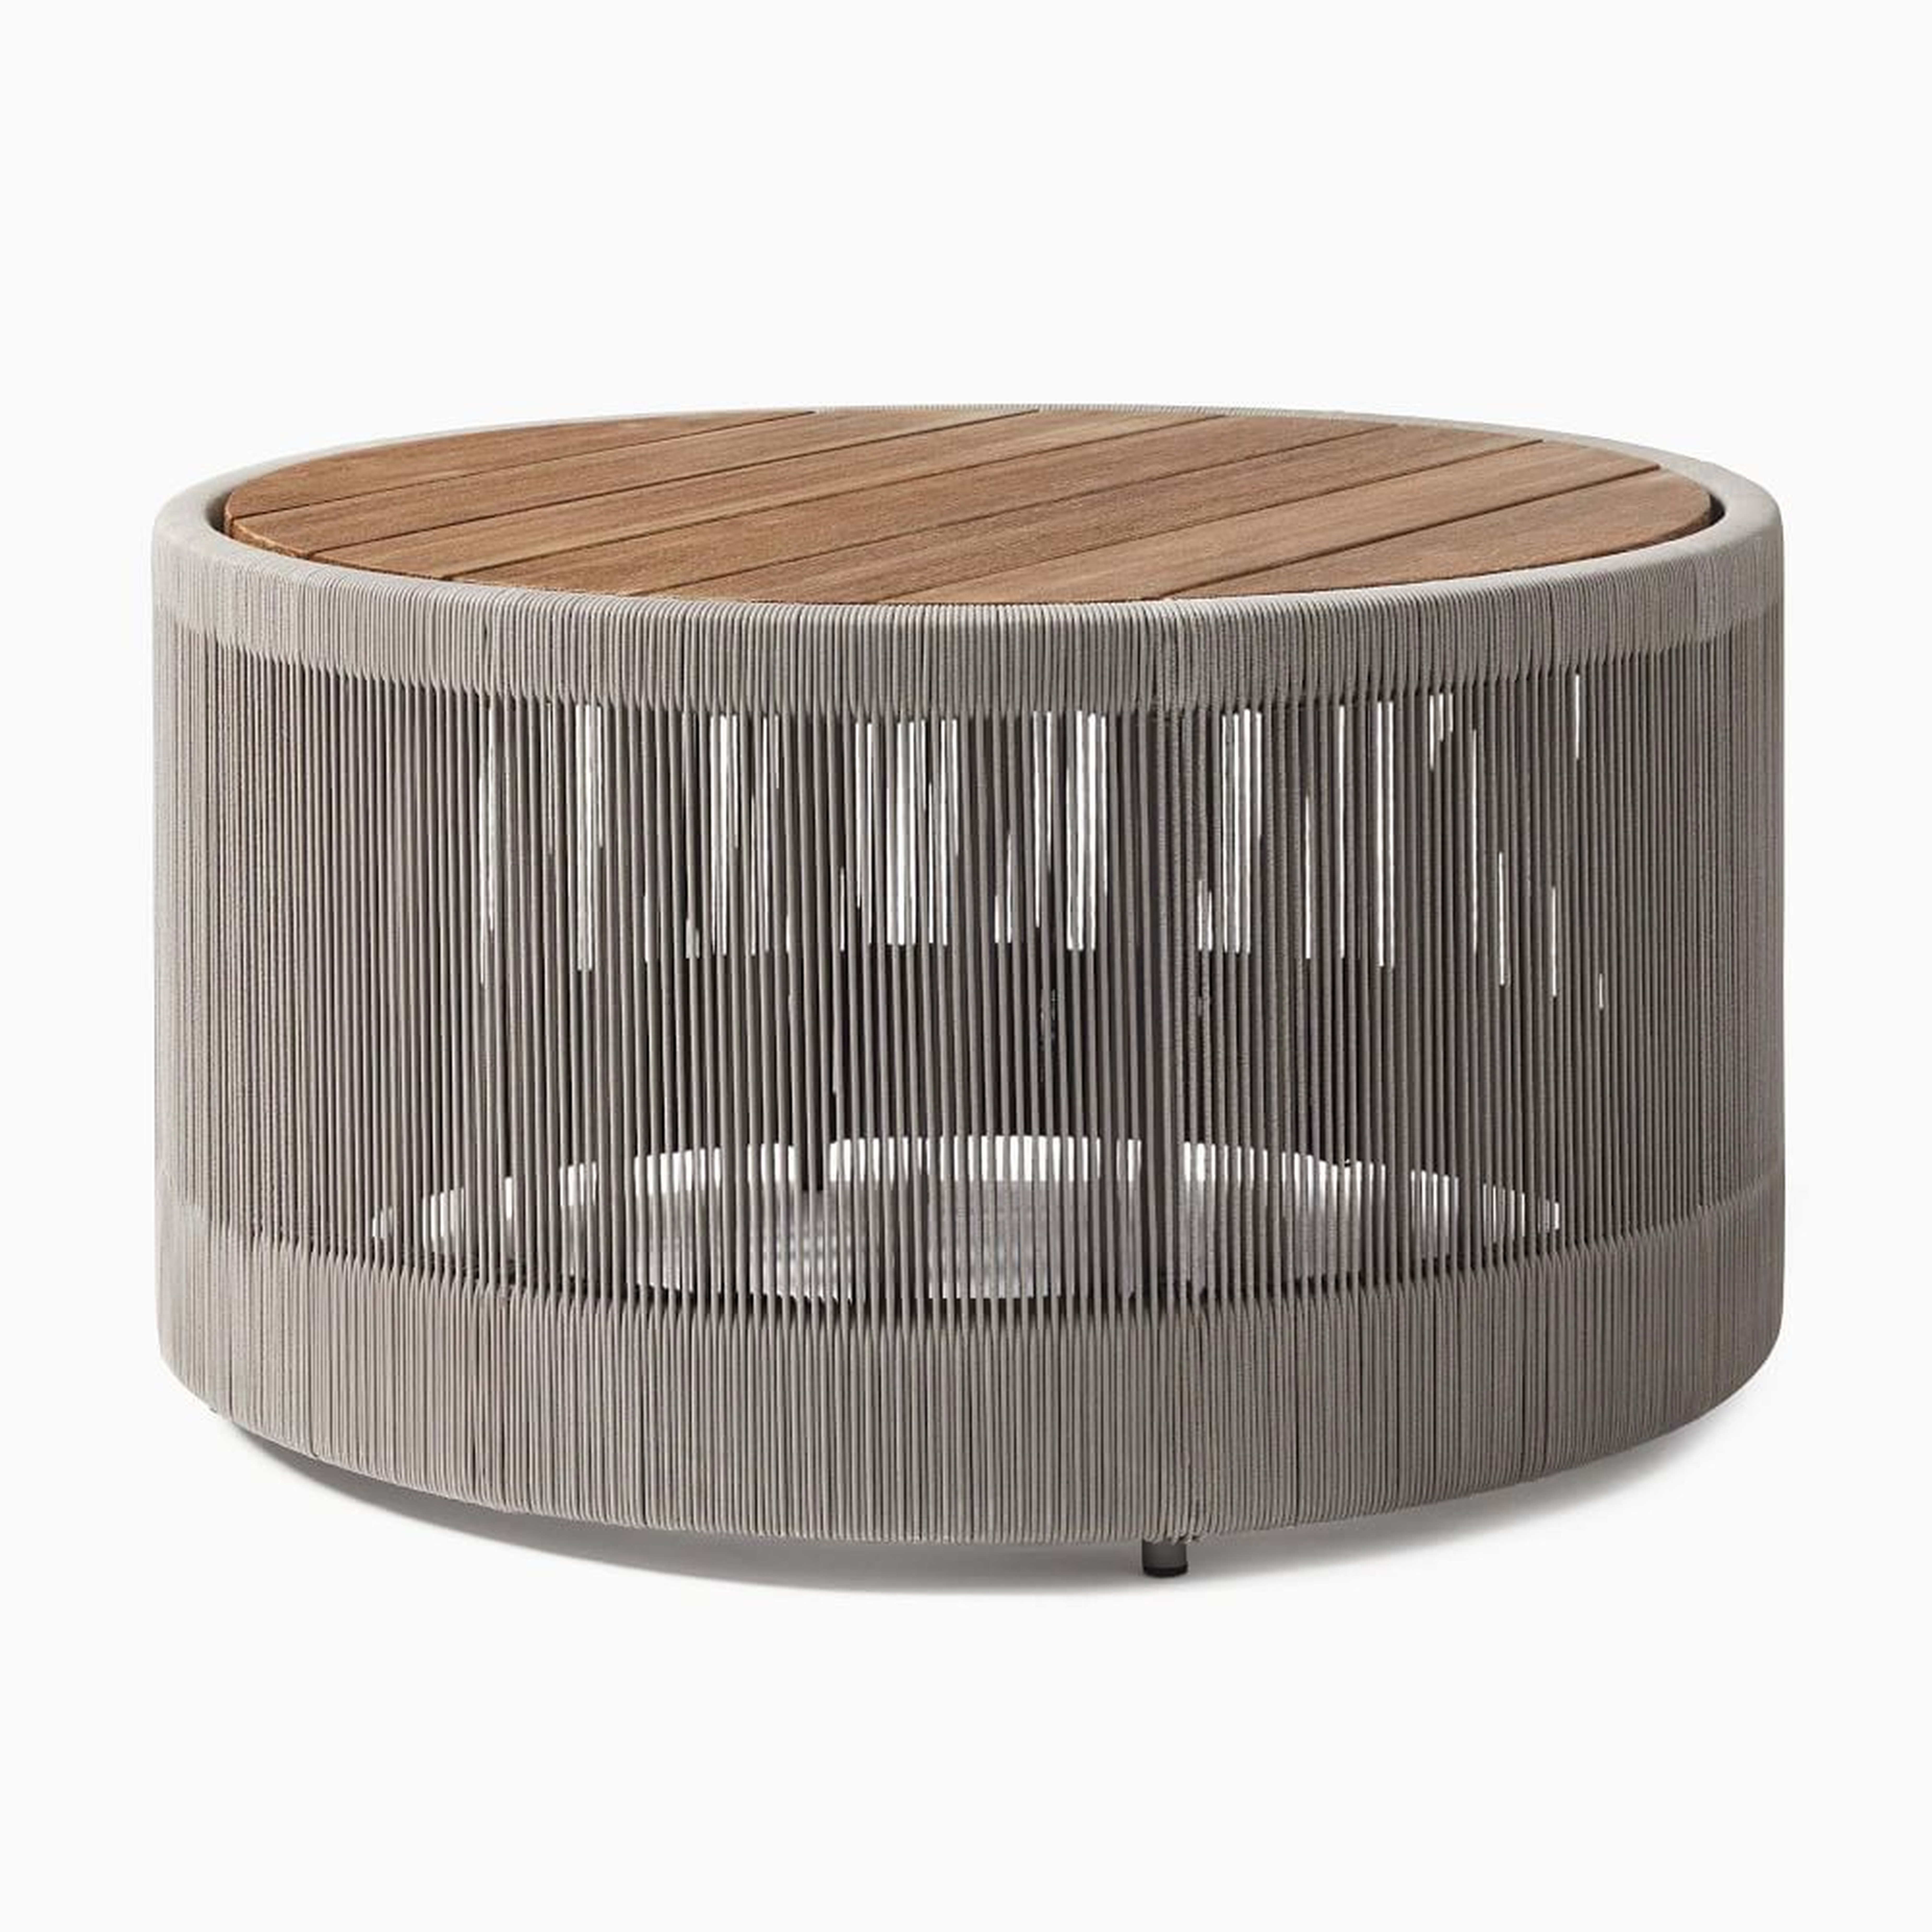 Porto Outdoor 32 in Round Coffee Table, Driftwood - West Elm